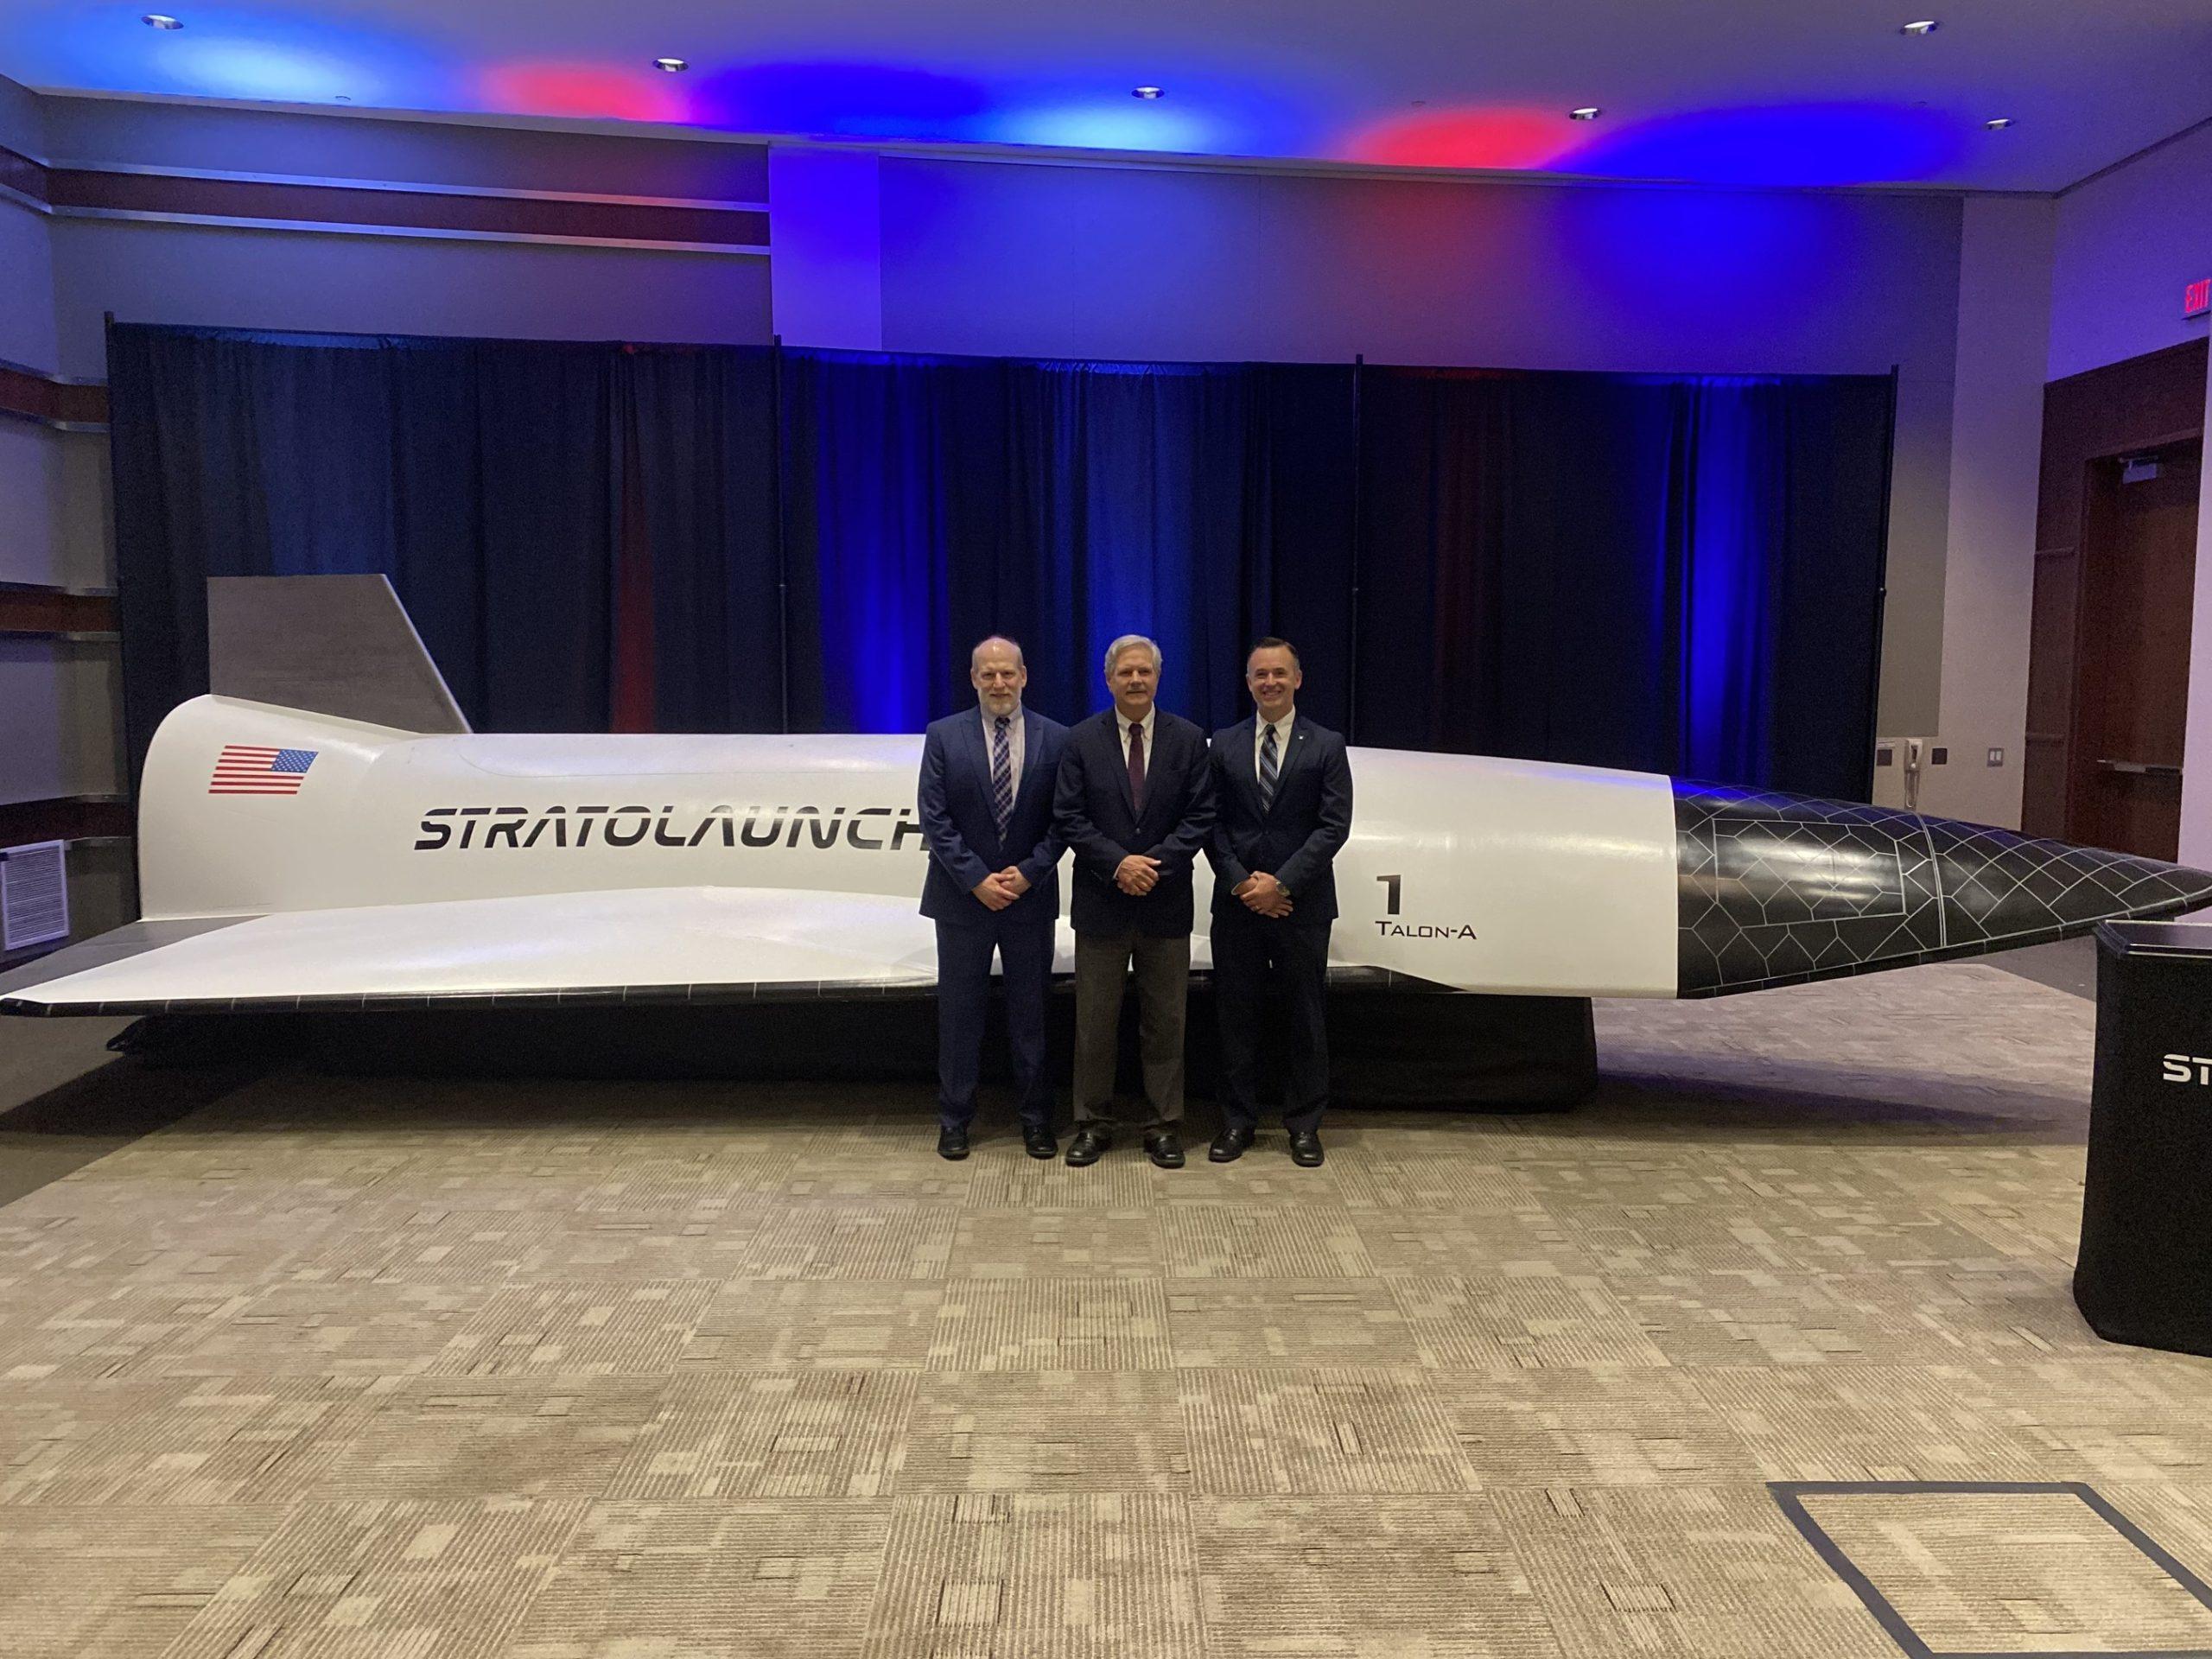 Test Resource Management Center Director George Rumford (left), U.S. Senator John Hoeven of North Dakota (center), and Stratolaunch CEO and President Dr. Zachary Krevor (right) unveiled the Talon-A vehicle replica and explained its role in the SkyRange program at the UAS Summit and Expo 2022 event on Oct. 4, 2022.